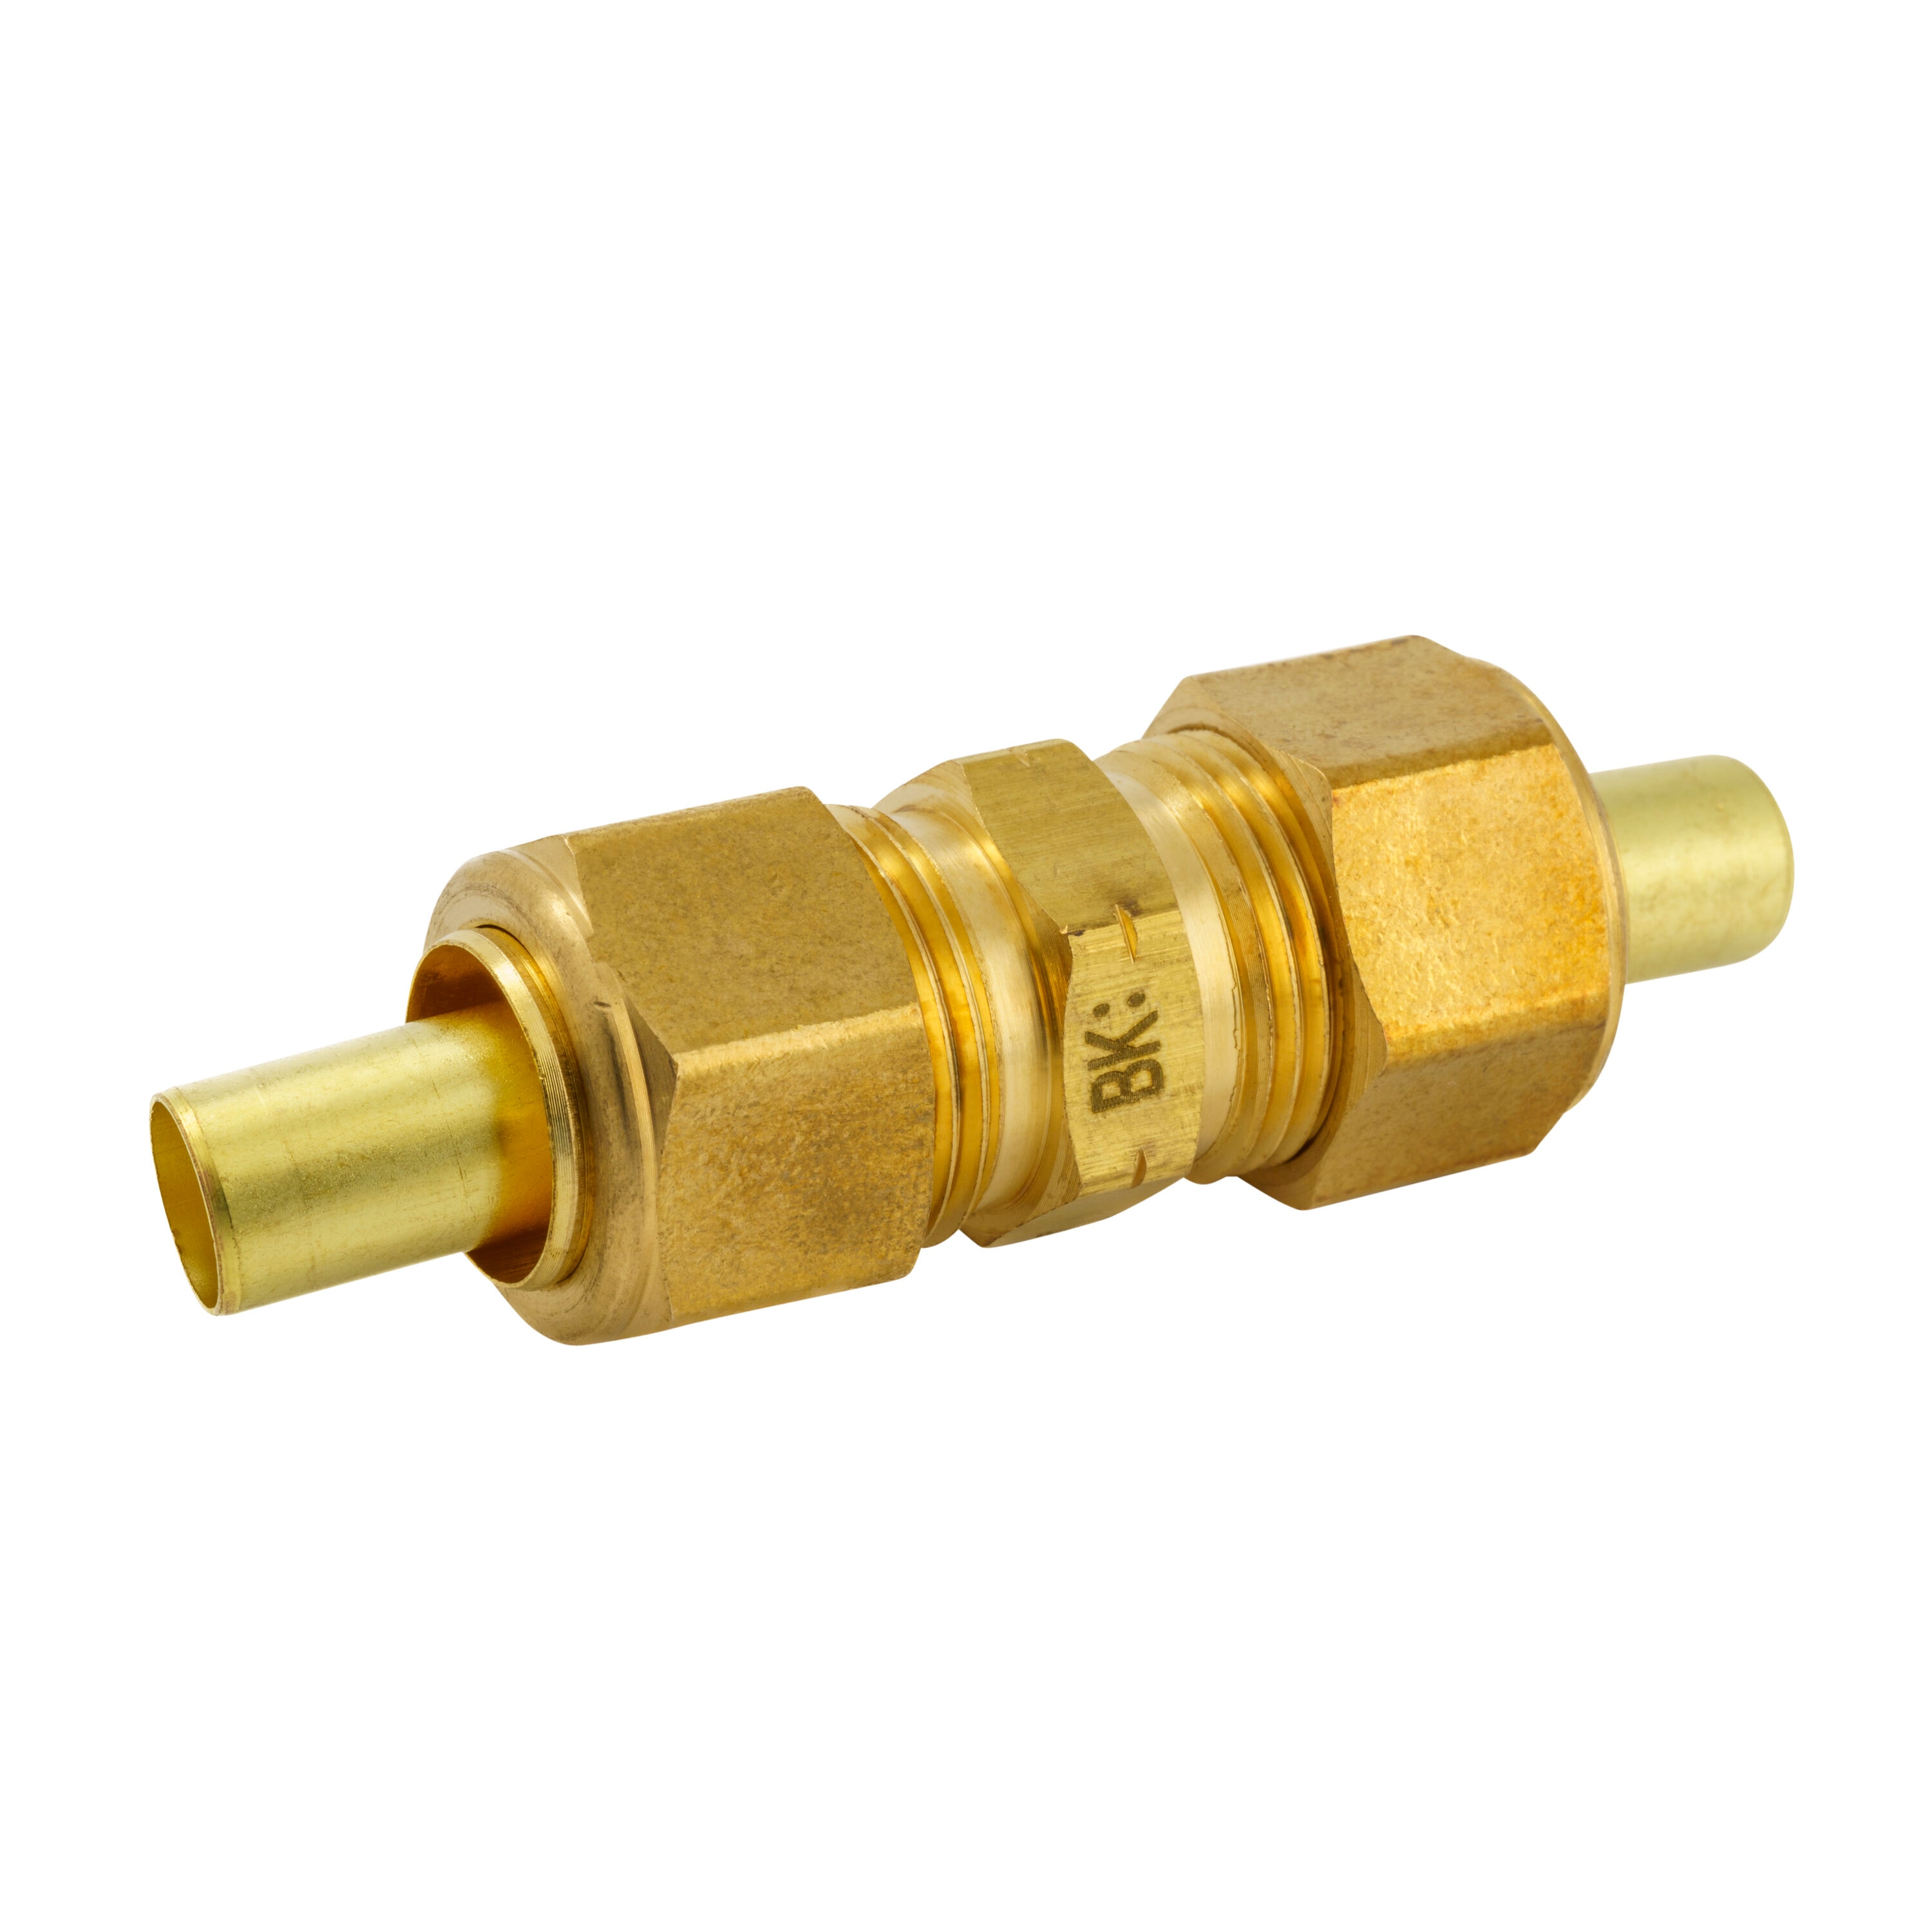 How to install a compression fitting on copper or plastic tubing - Quora